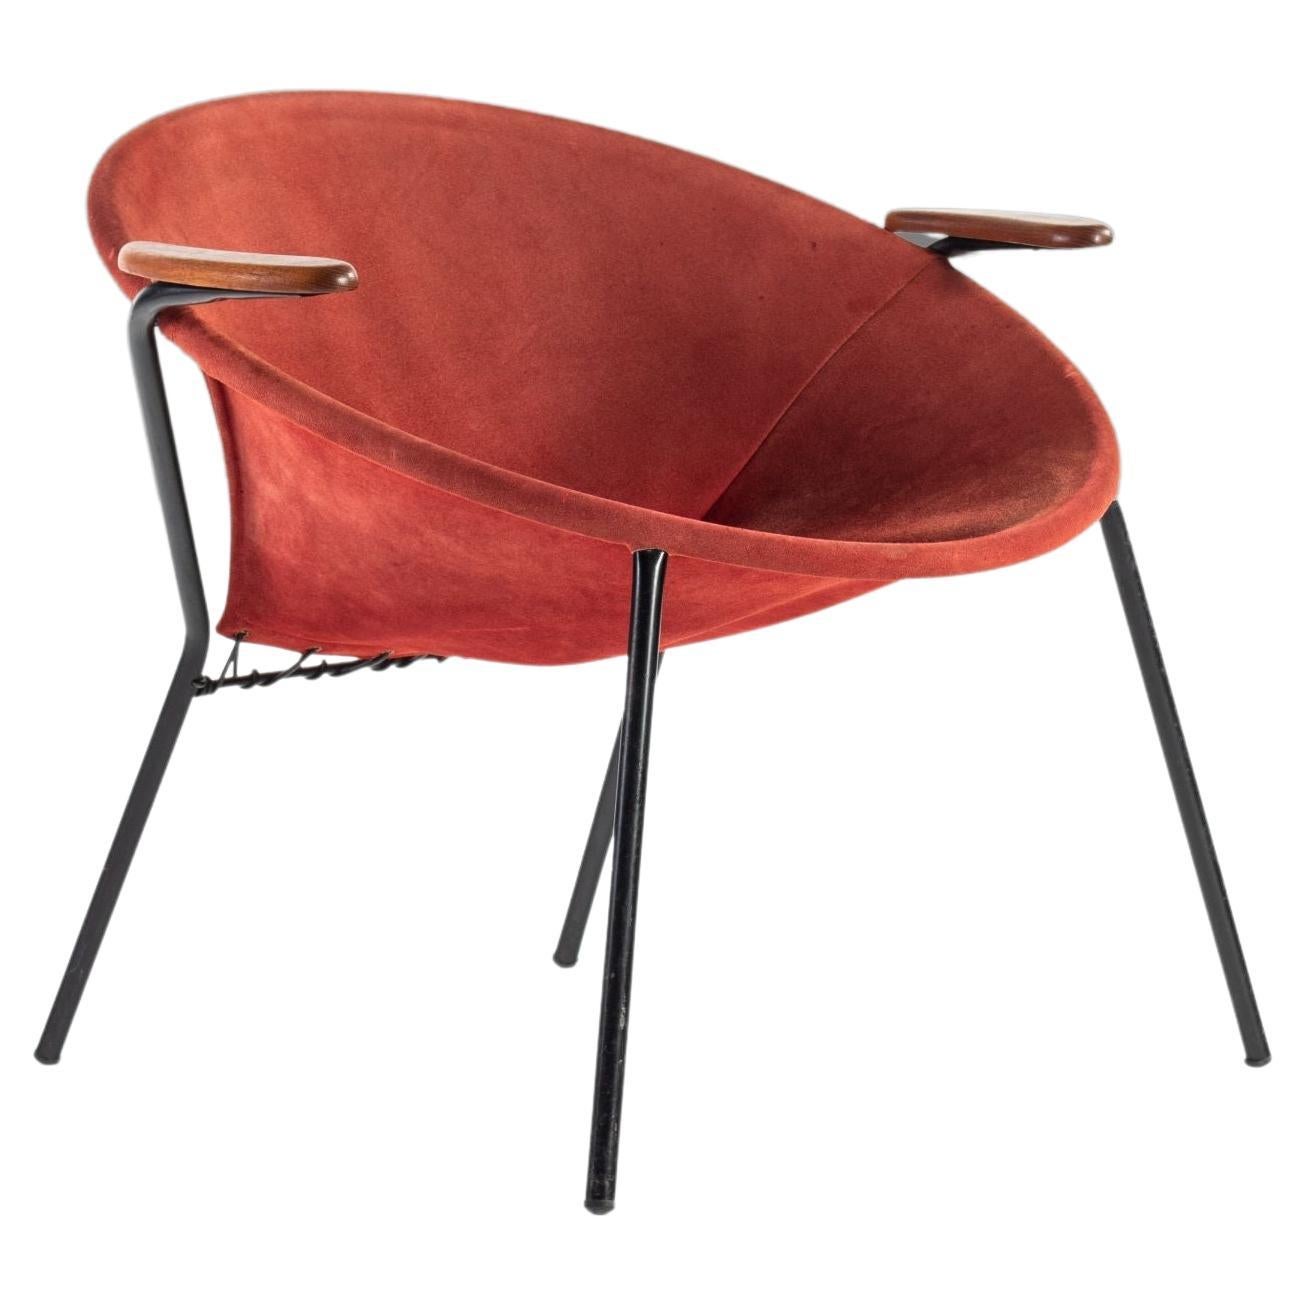 Mid Century Balloon / Hoop Chair in Red Dyed Suede by Hans Olsen, Denmark, 1960s